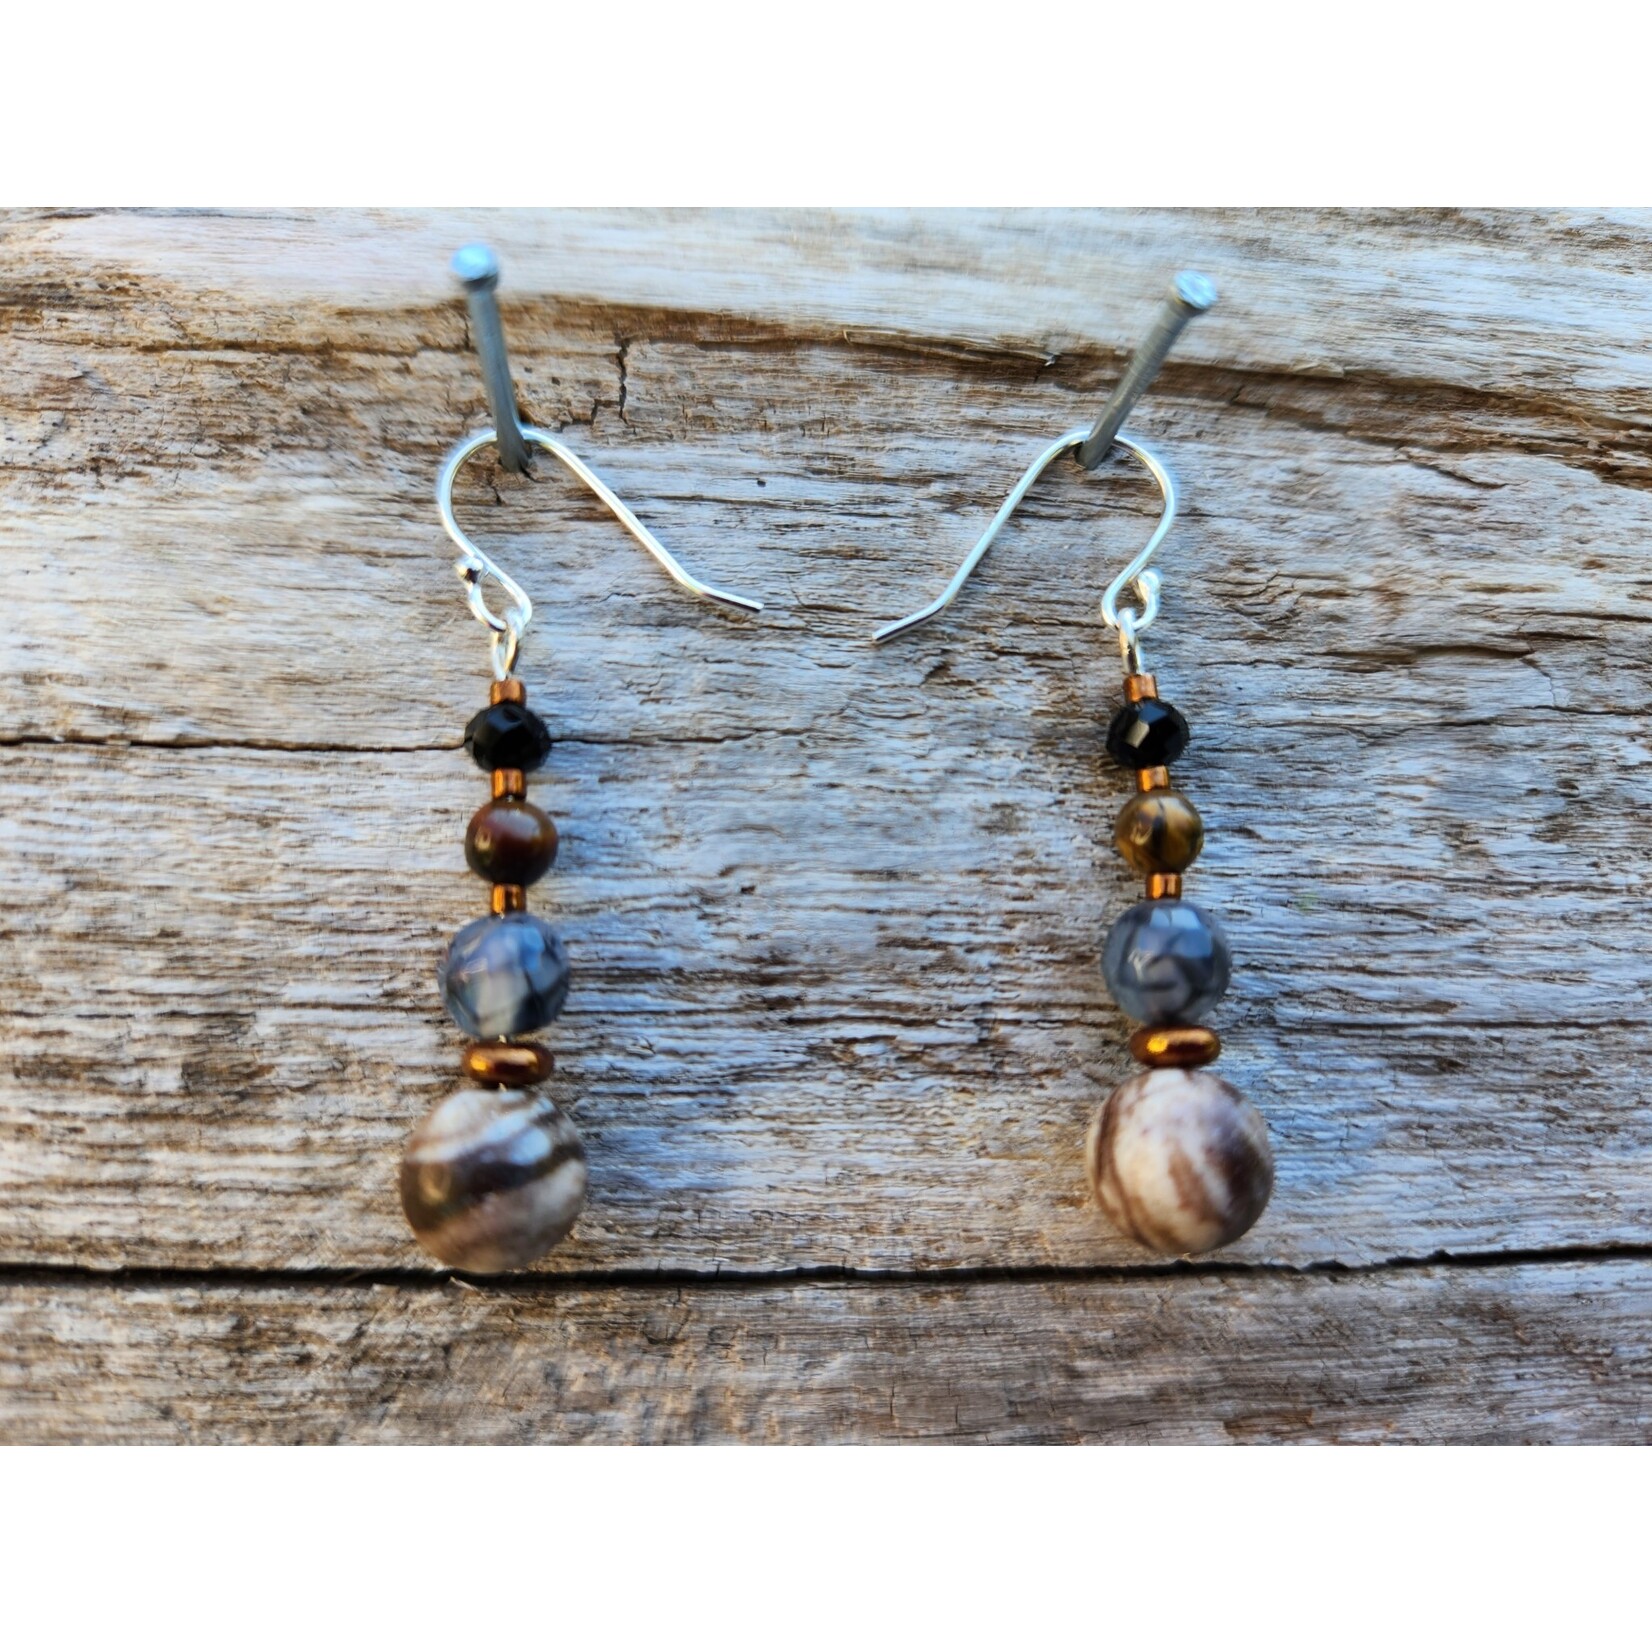 HB Designs  Driftwood drops agate and jasper earrings, Sterling Silver ear wires